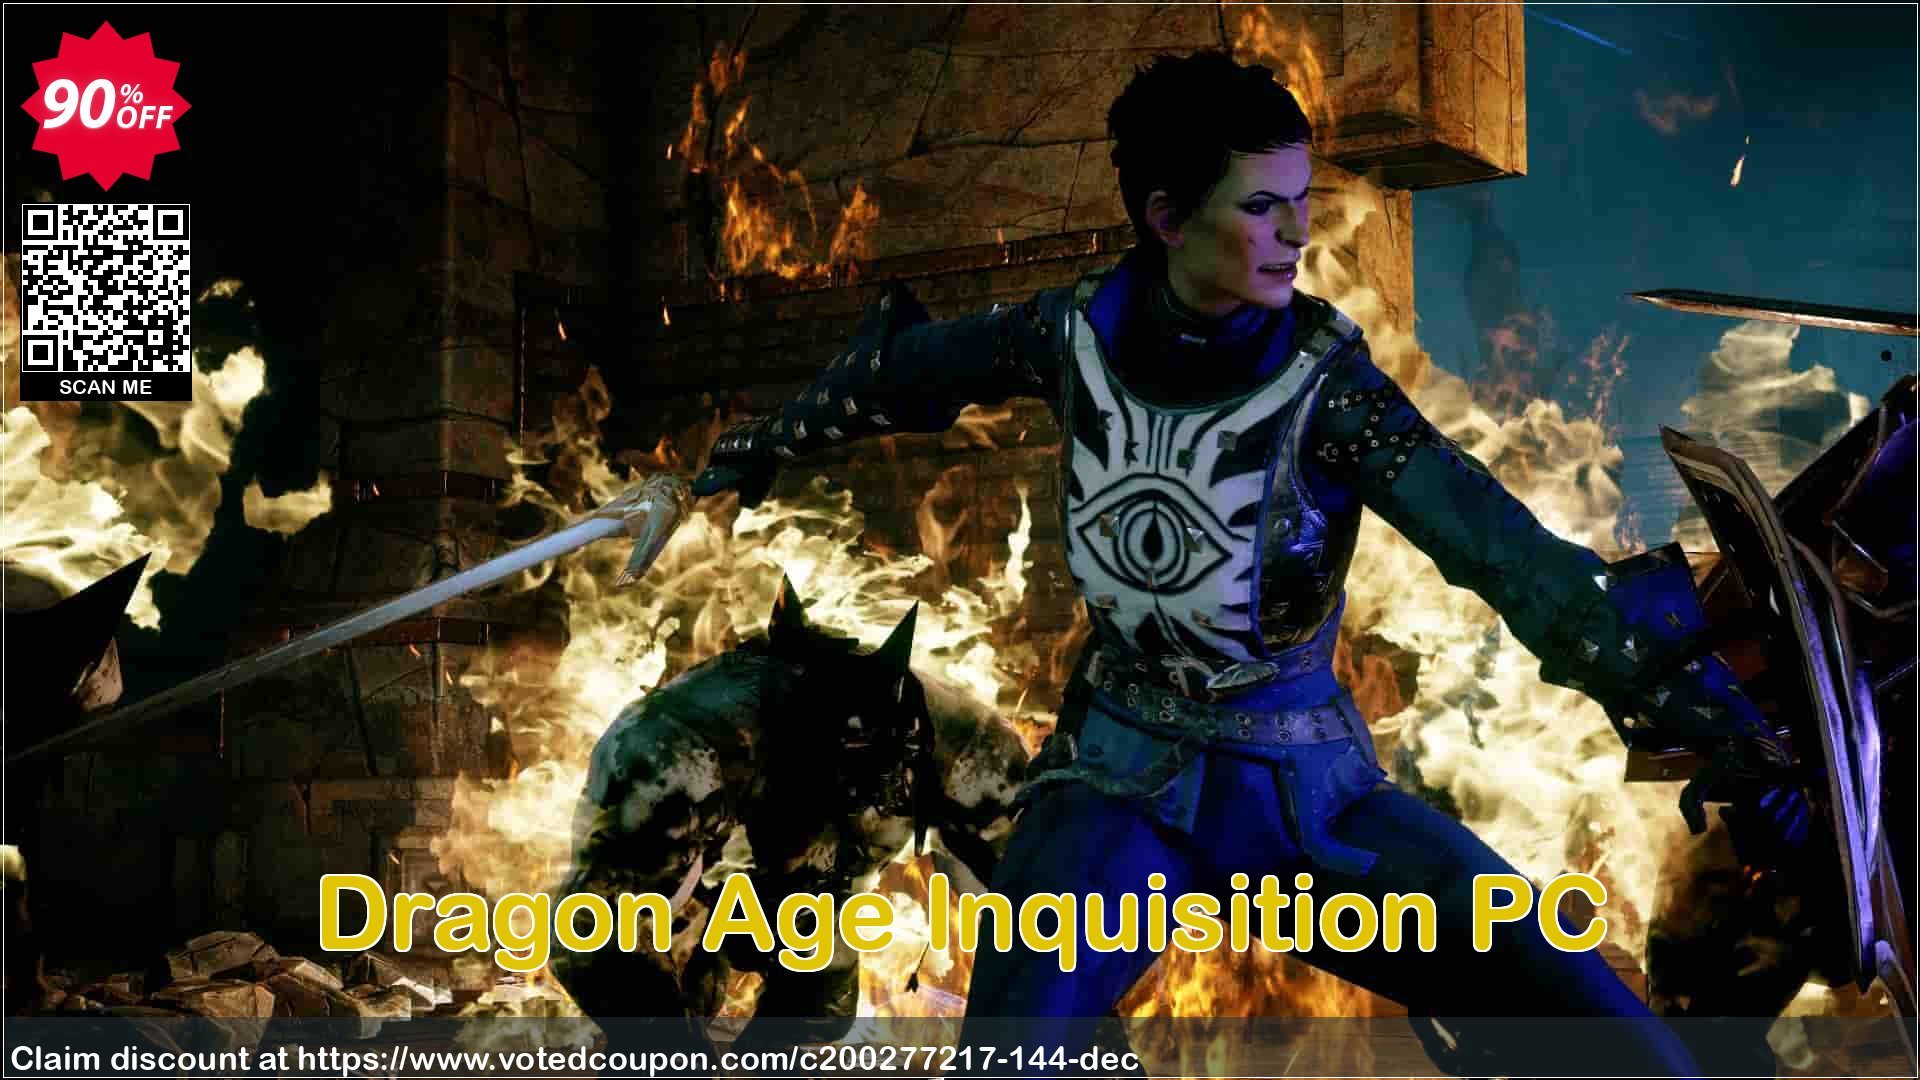 Dragon Age Inquisition PC voted-on promotion codes